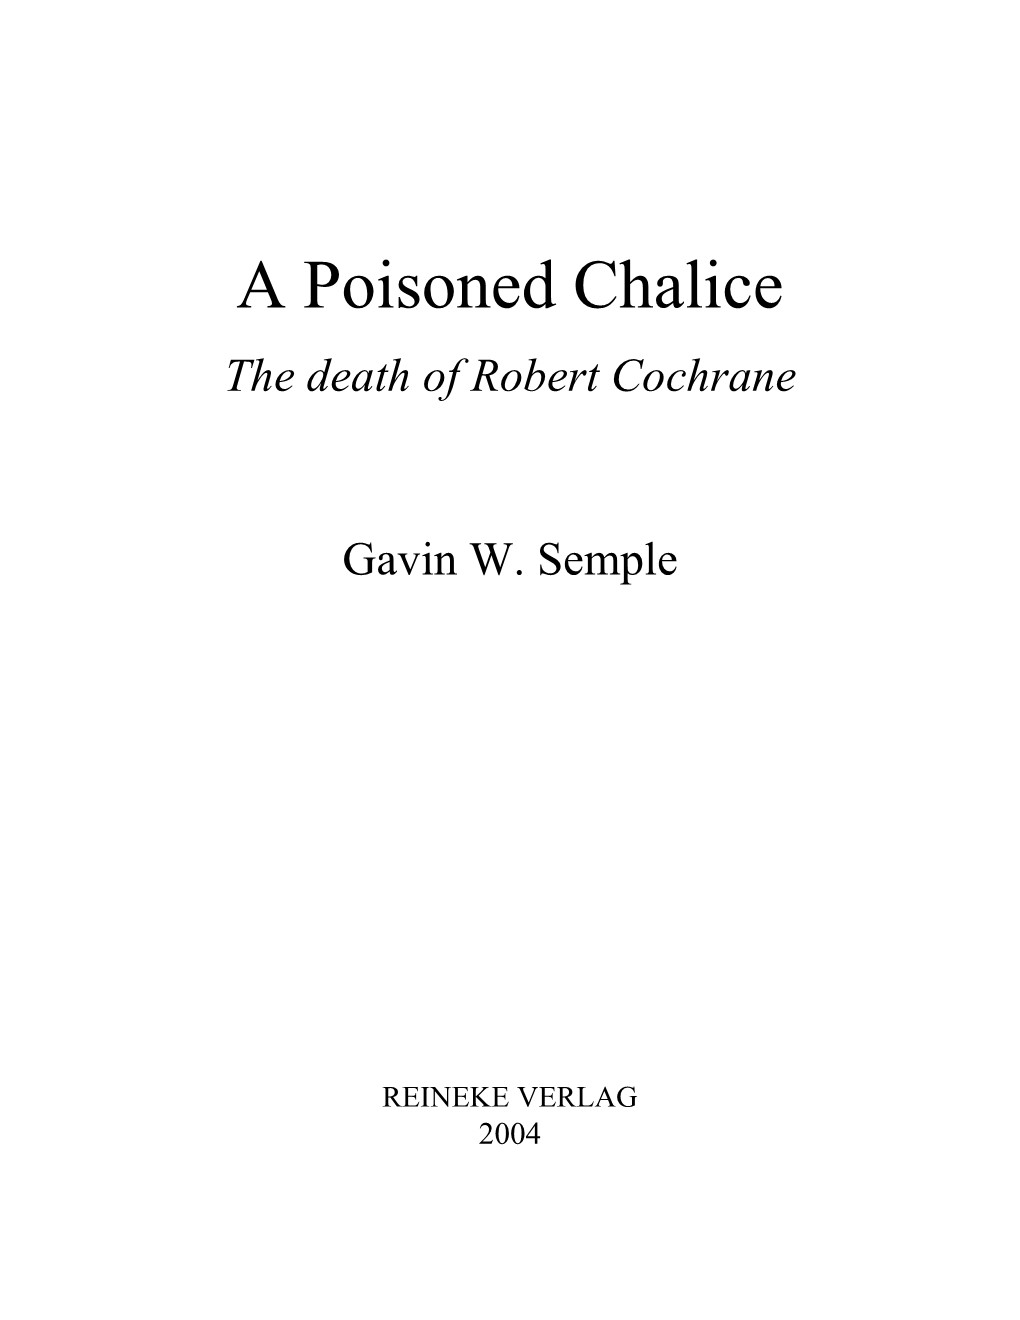 A Poisoned Chalice